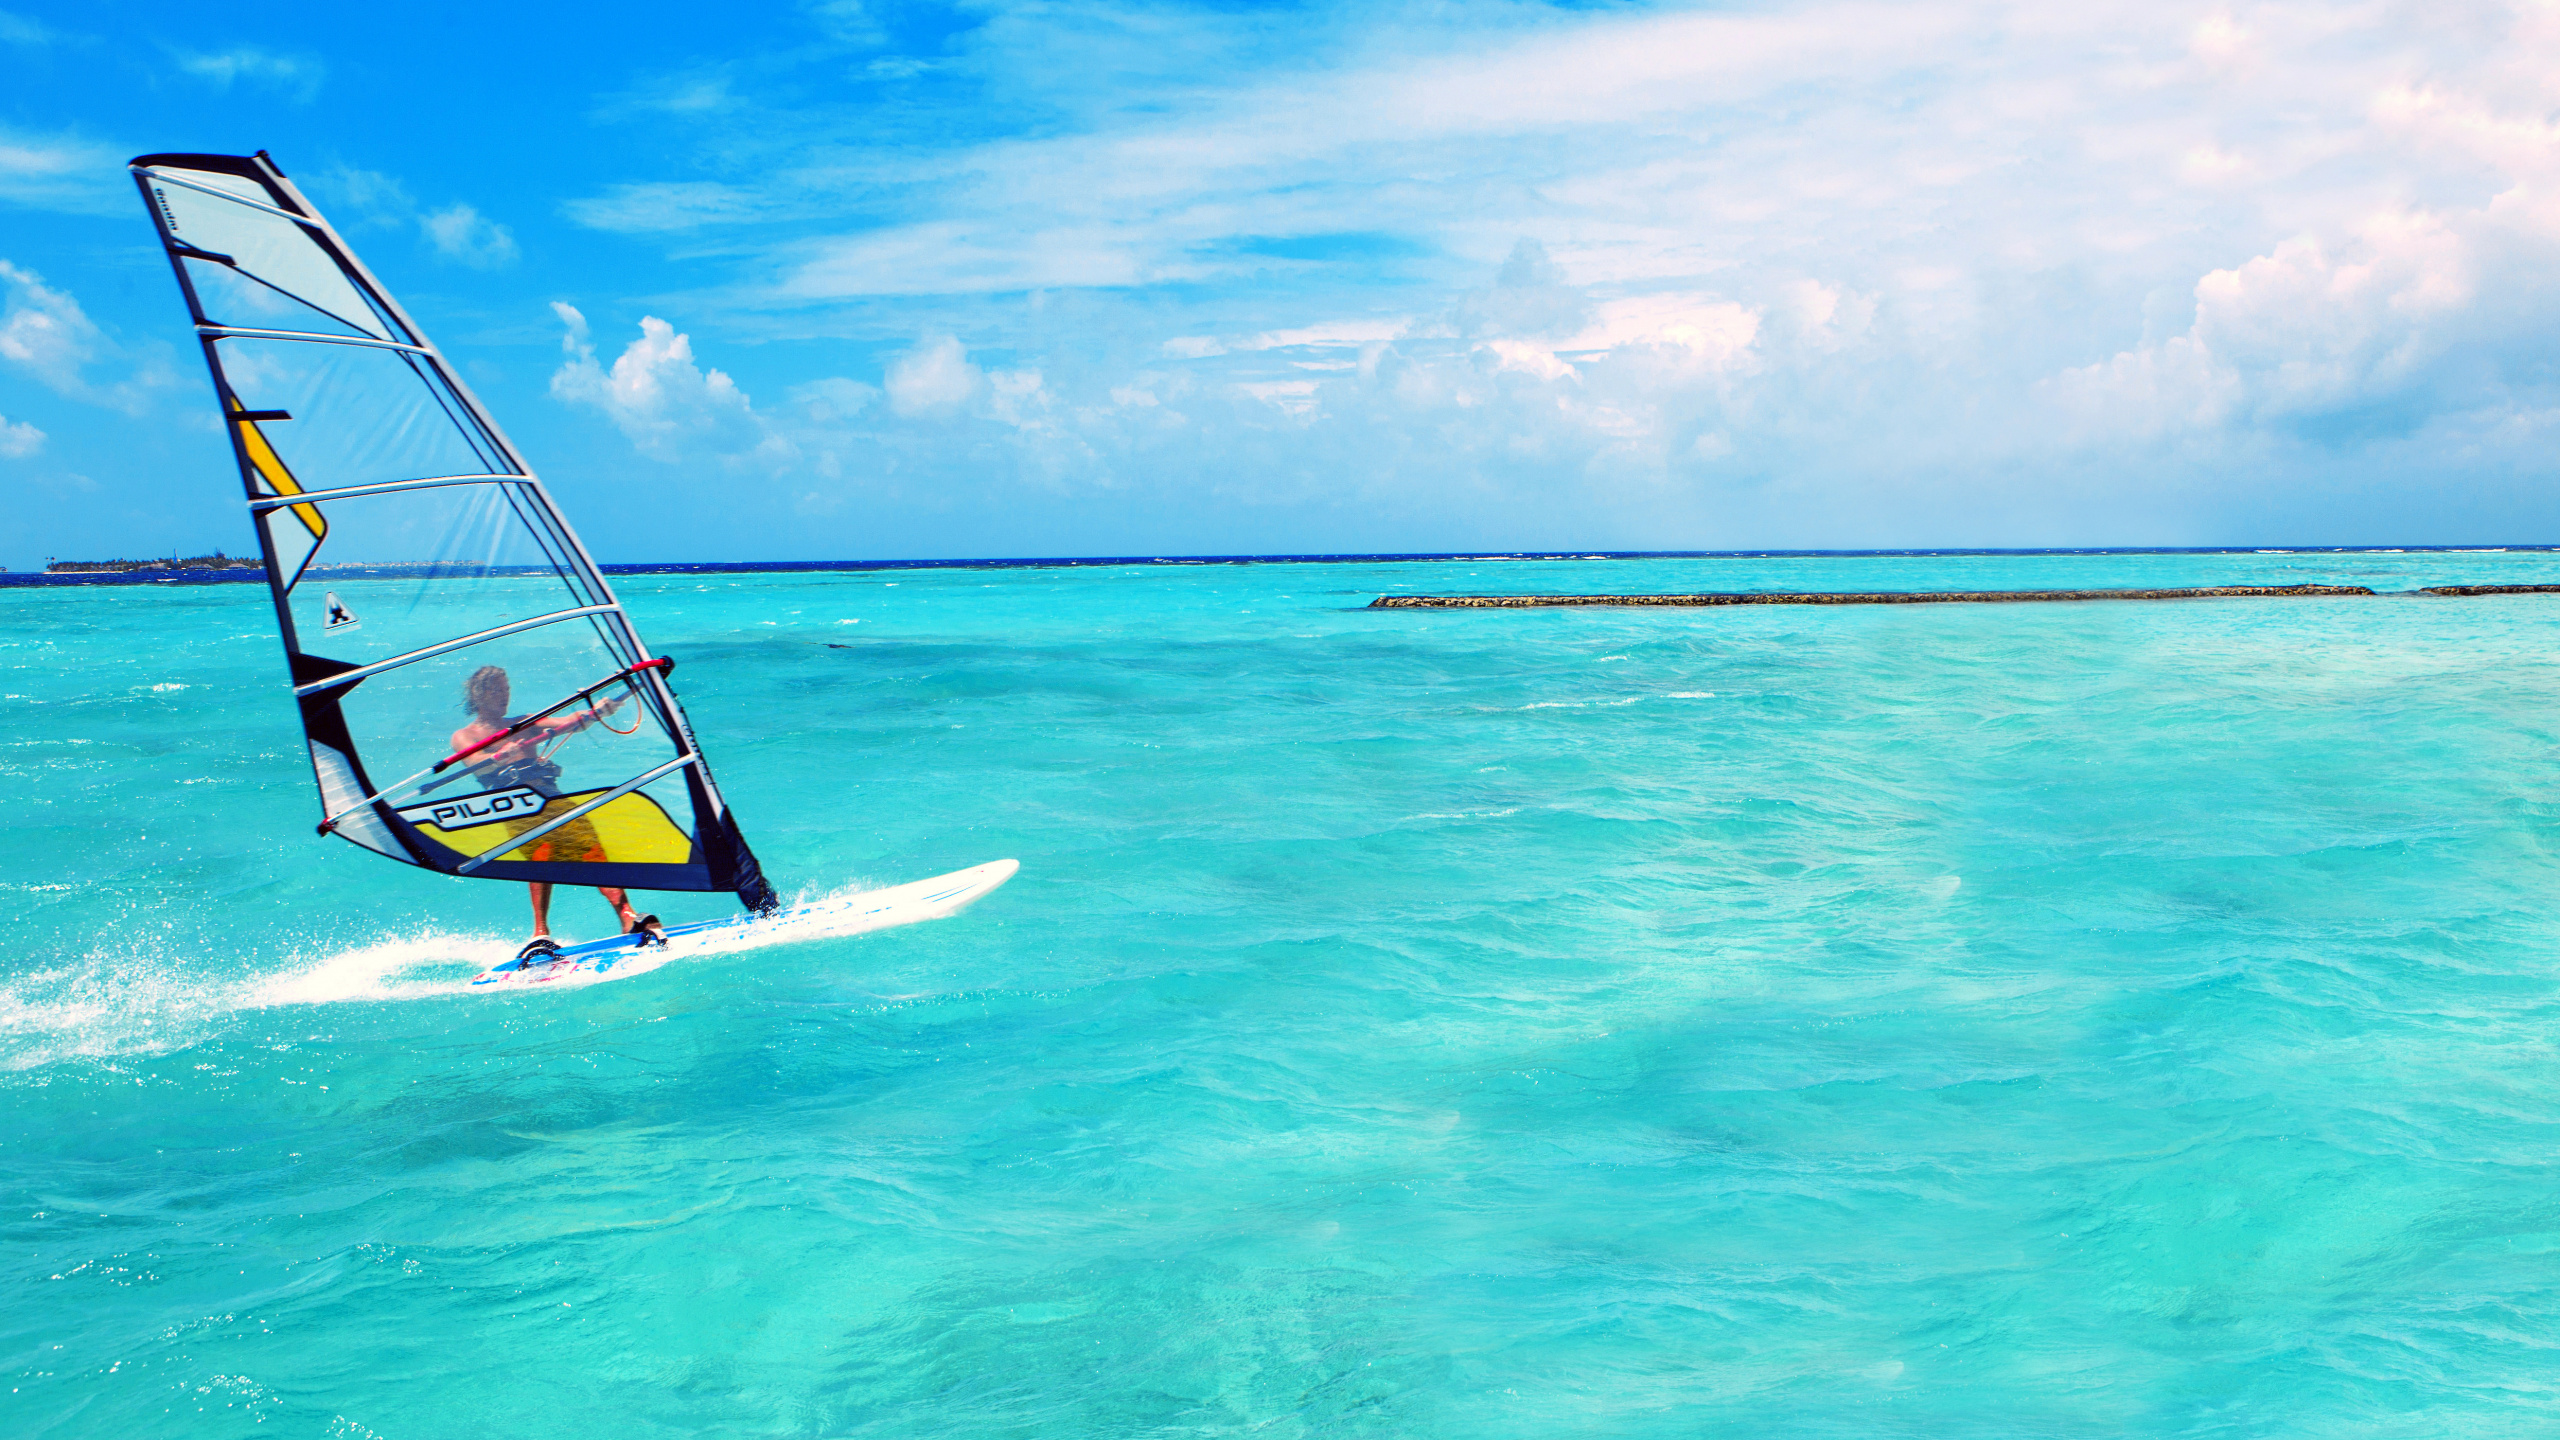 Yellow and White Sail Boat on Blue Sea Under Blue Sky During Daytime. Wallpaper in 2560x1440 Resolution